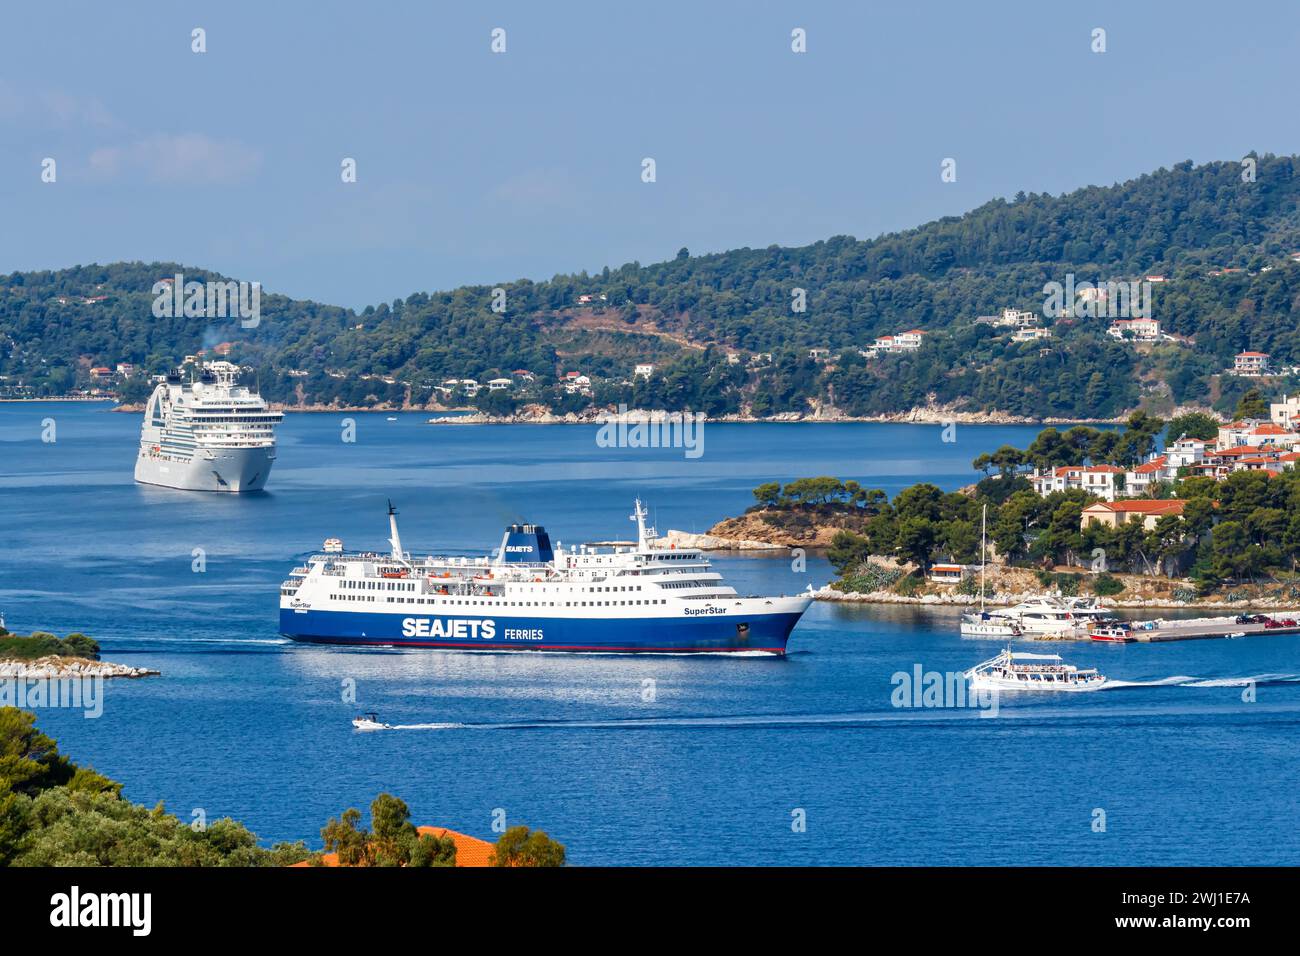 Cruise ship ferry and boats in the sea off the Mediterranean island of Skiathos, Greece Stock Photo